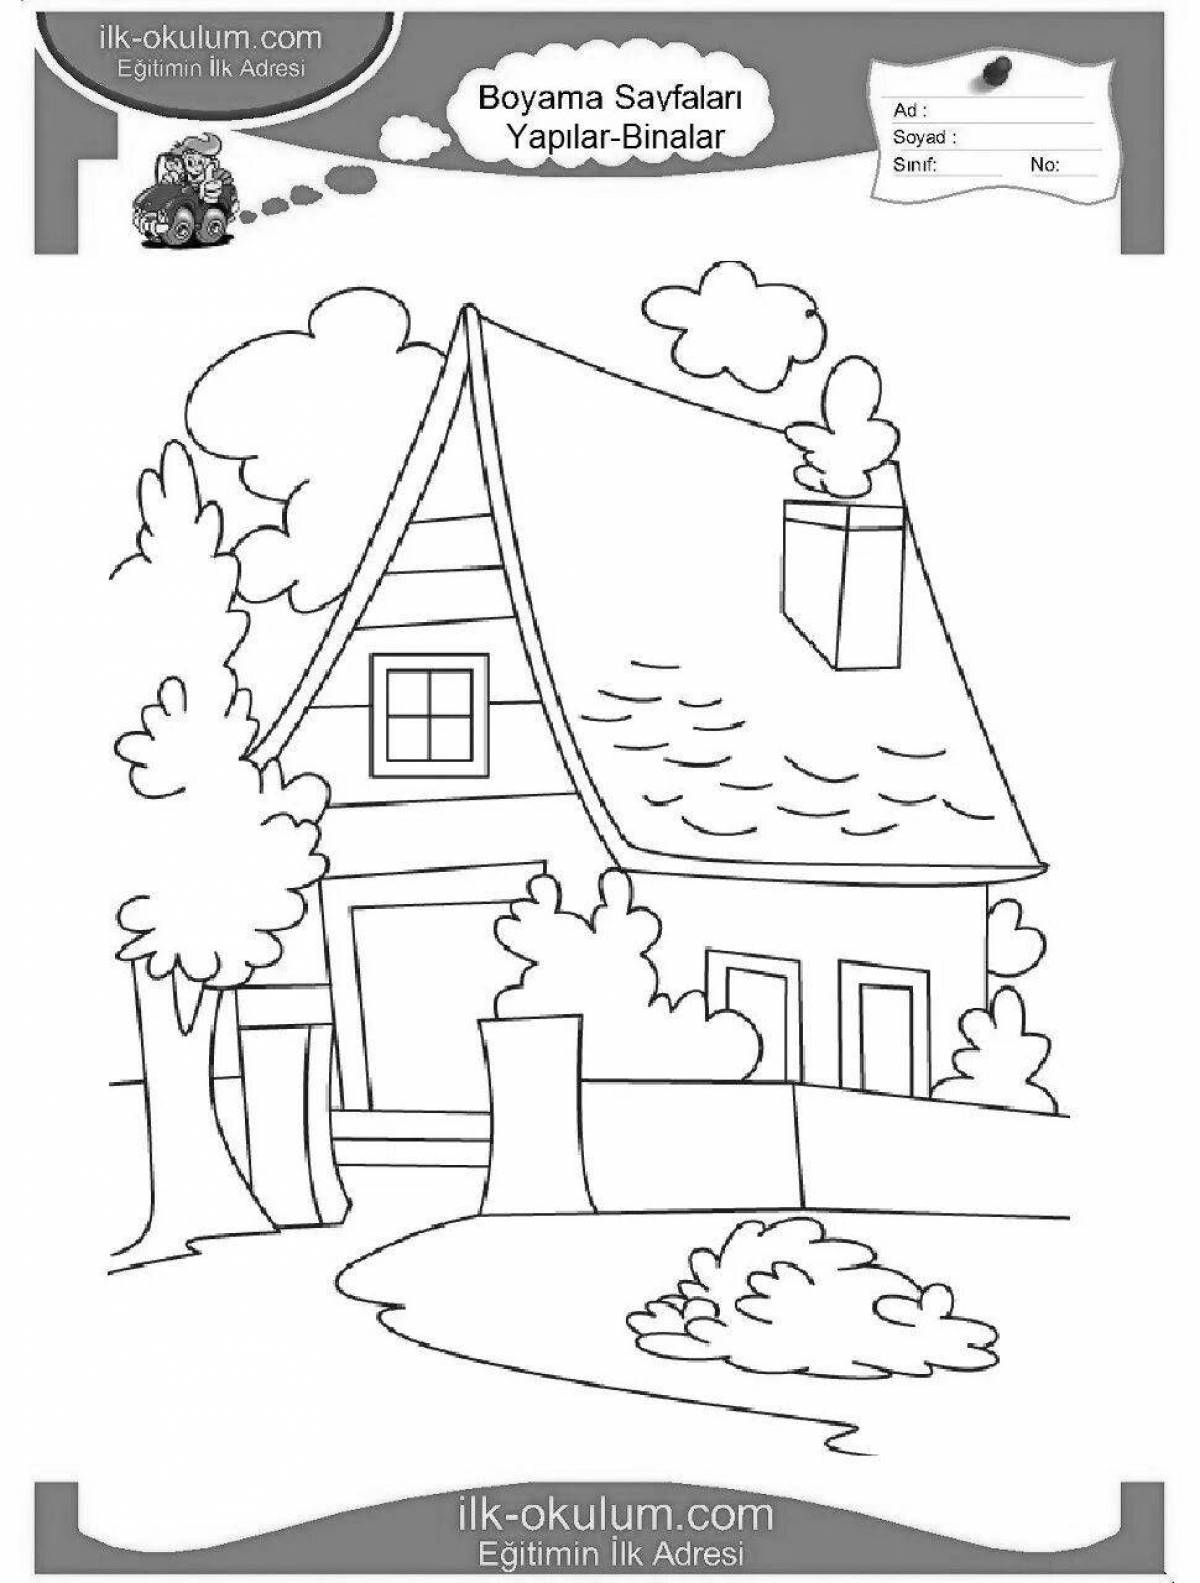 Sparkling burning house coloring book for kids